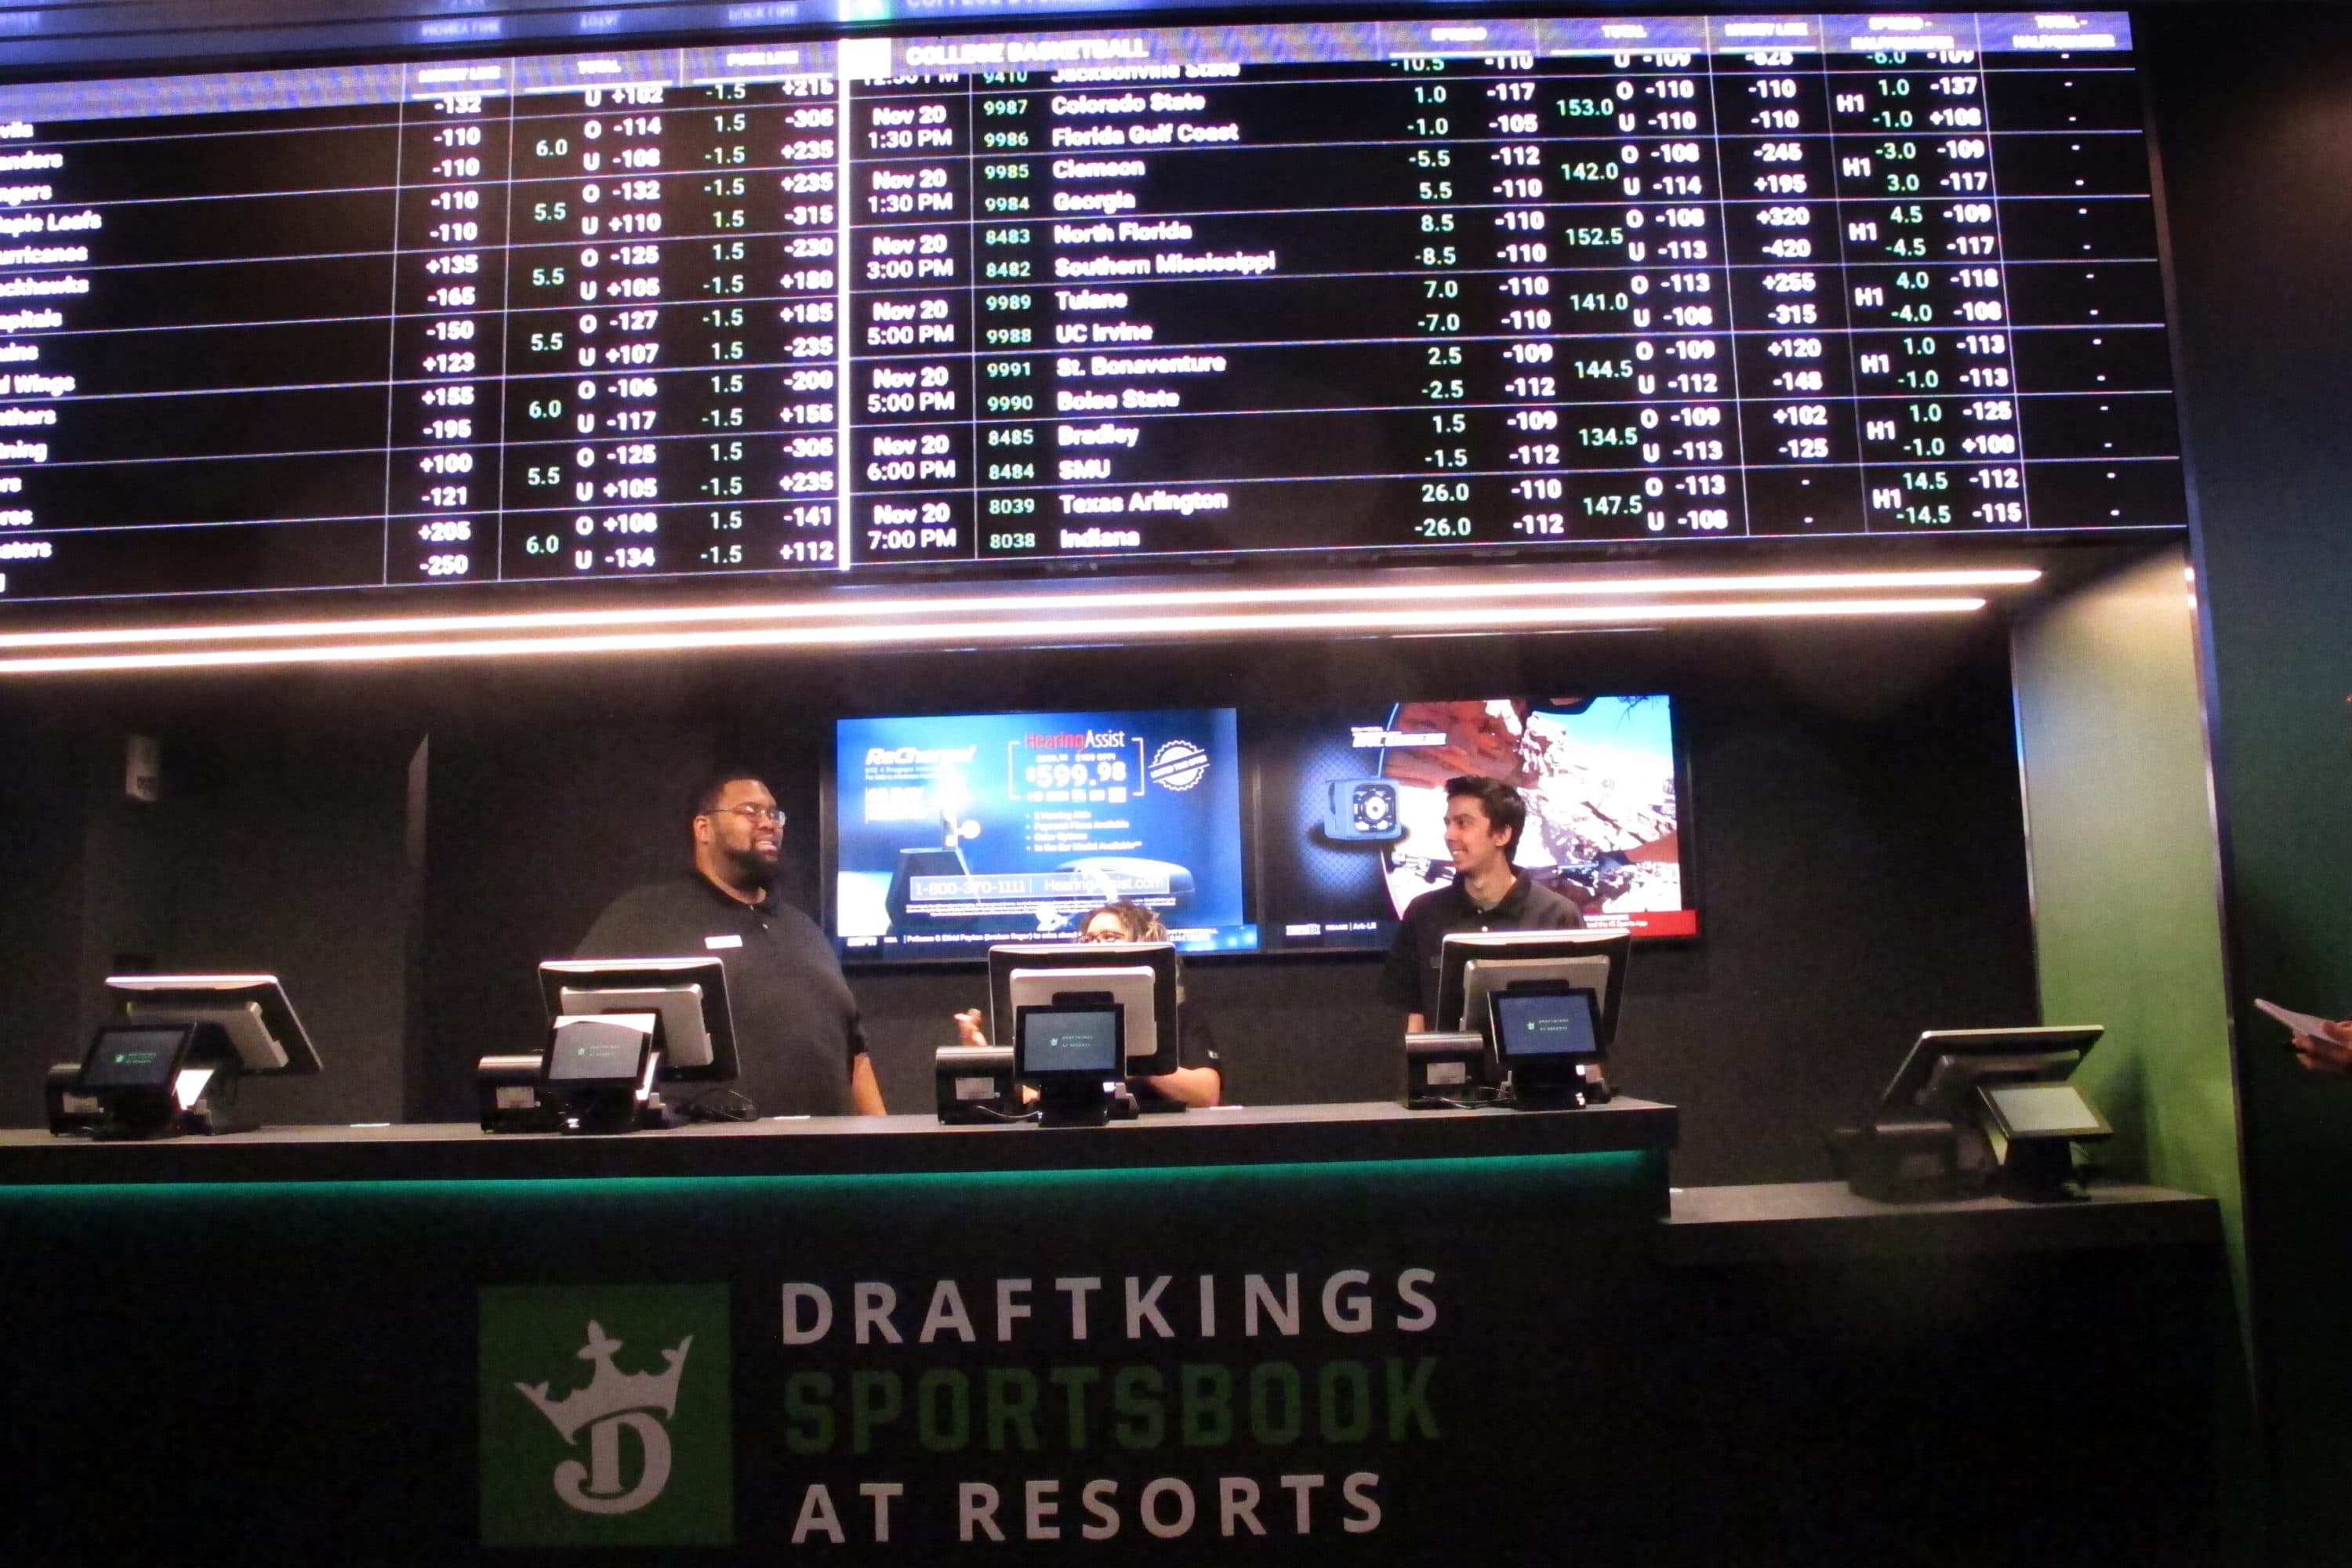 Employees work at the DraftKings sportsbook at the Resorts Casino on November 20, 2018 in Atlantic City, New Jersey.  (Wayne Parry/AP file)